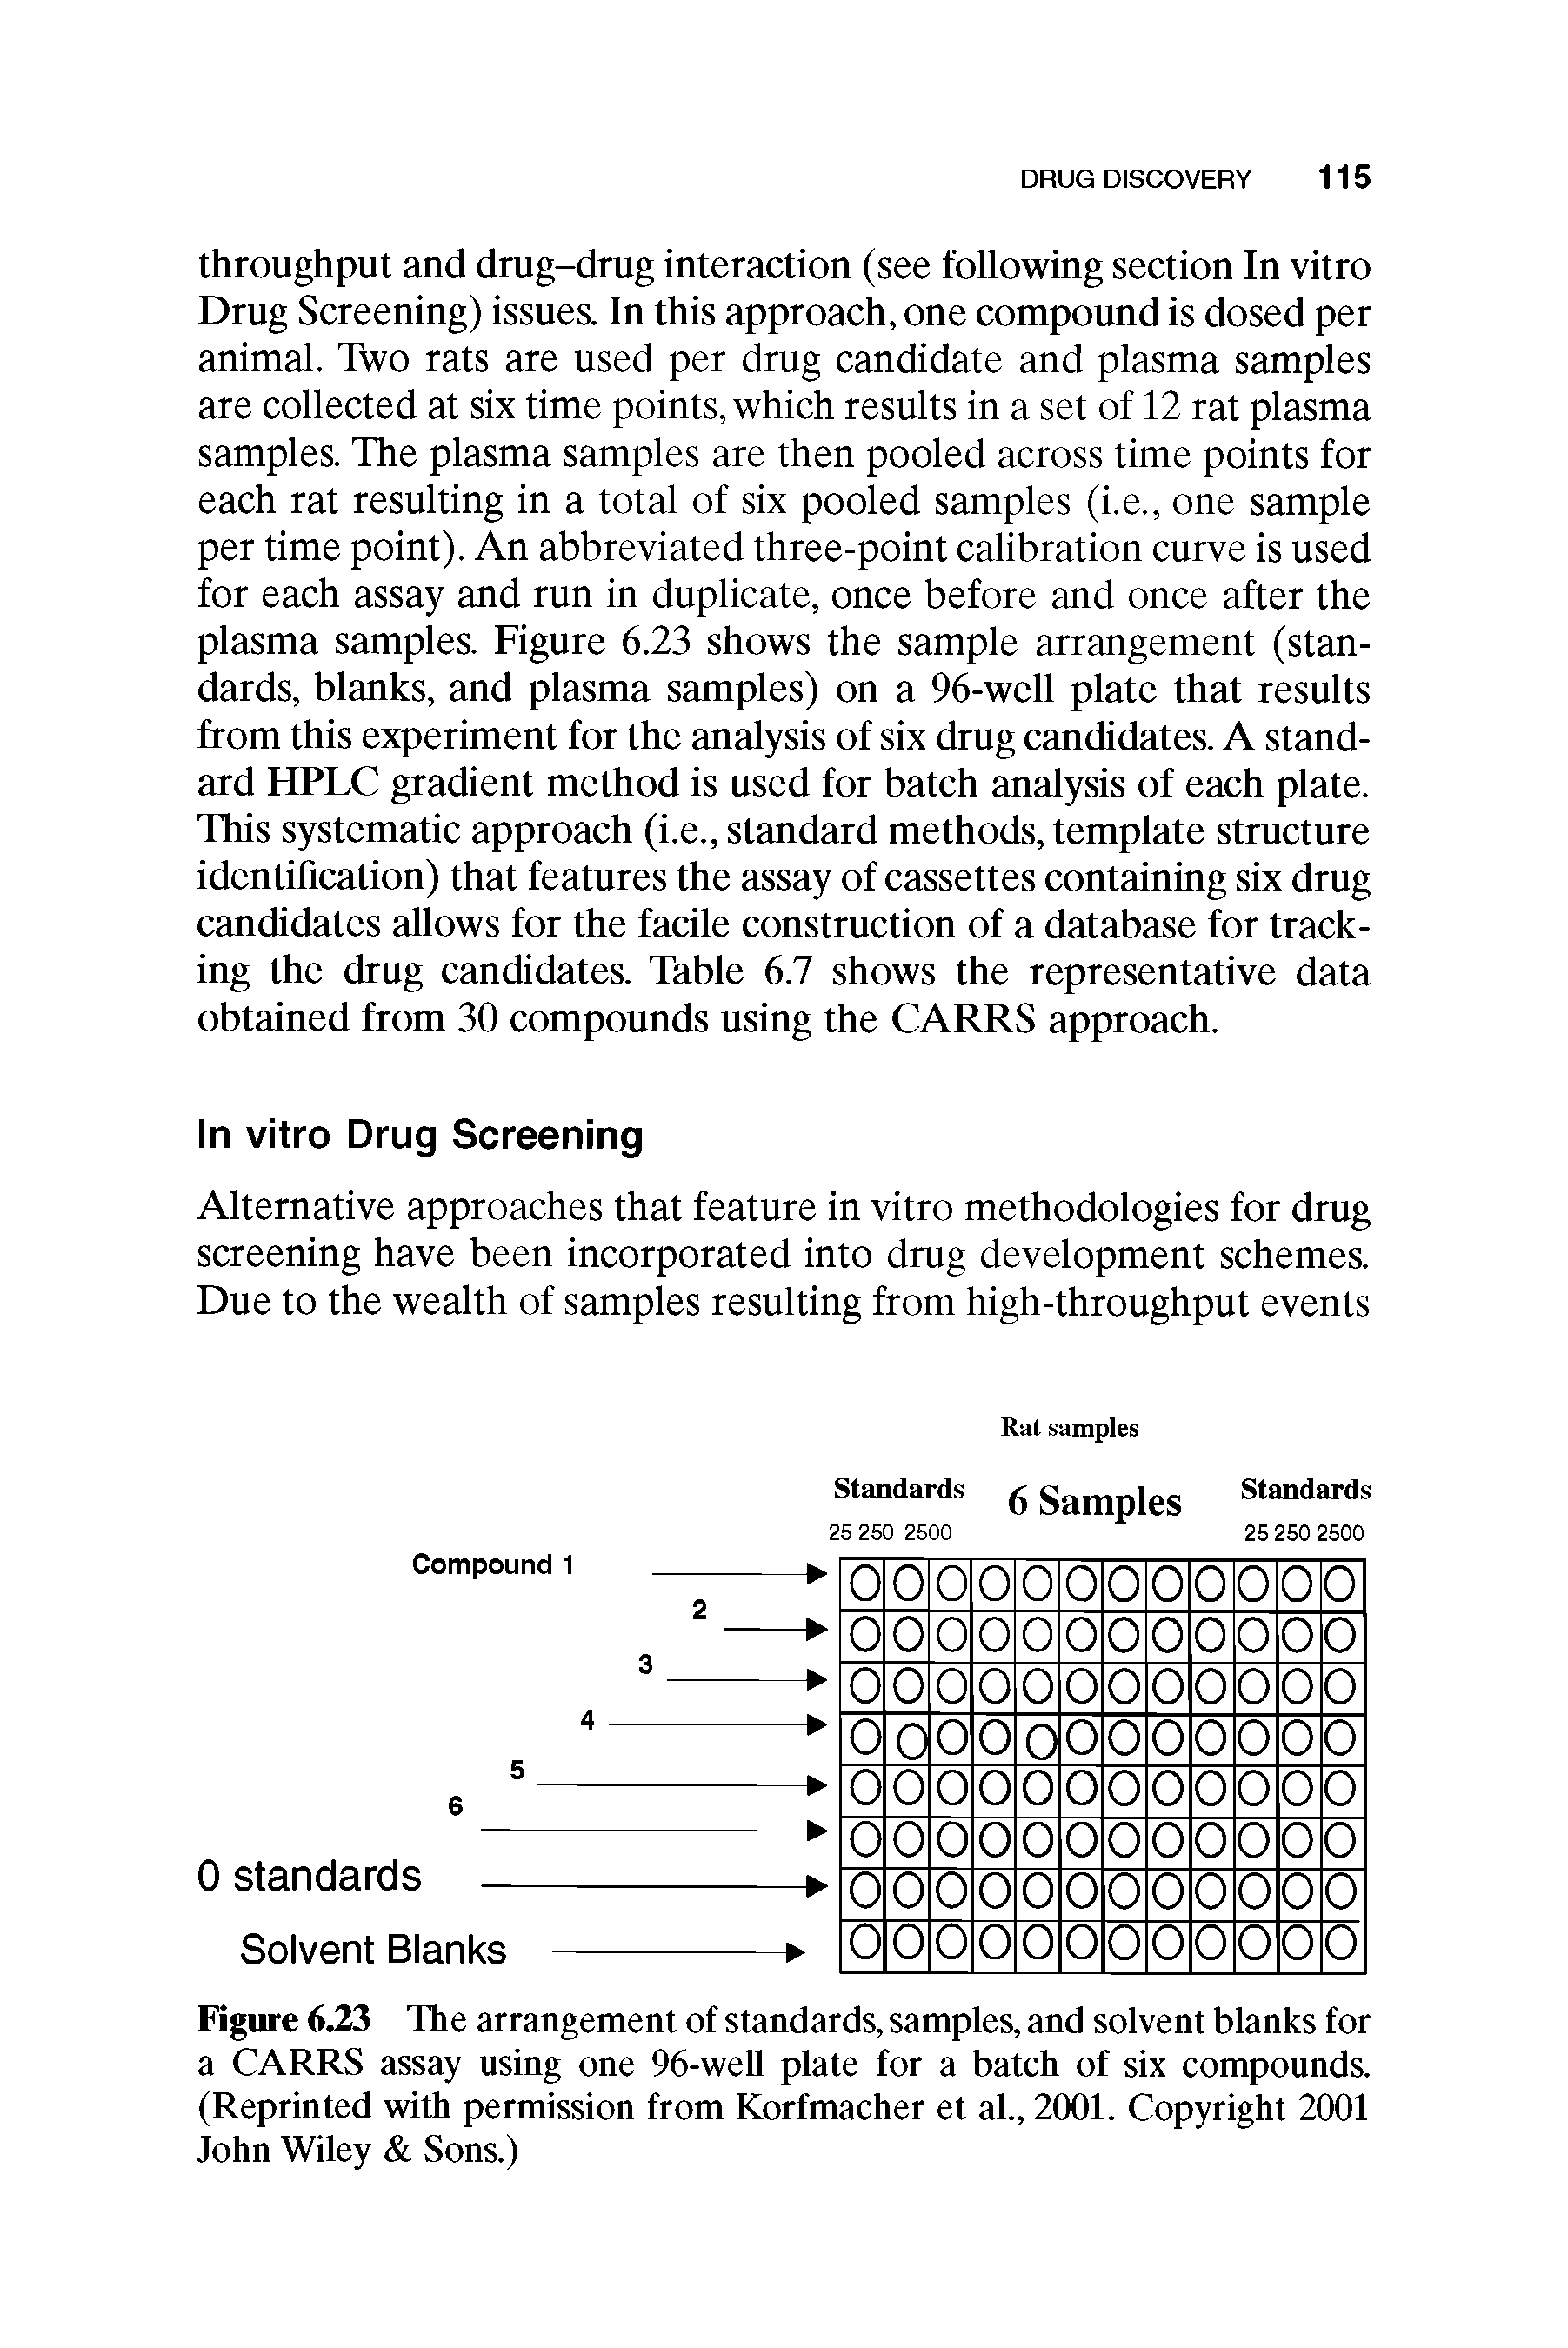 Figure 6.23 The arrangement of standards, samples, and solvent blanks for a CARRS assay using one 96-well plate for a batch of six compounds. (Reprinted with permission from Korfmacher et al., 2001. Copyright 2001 John Wiley Sons.)...